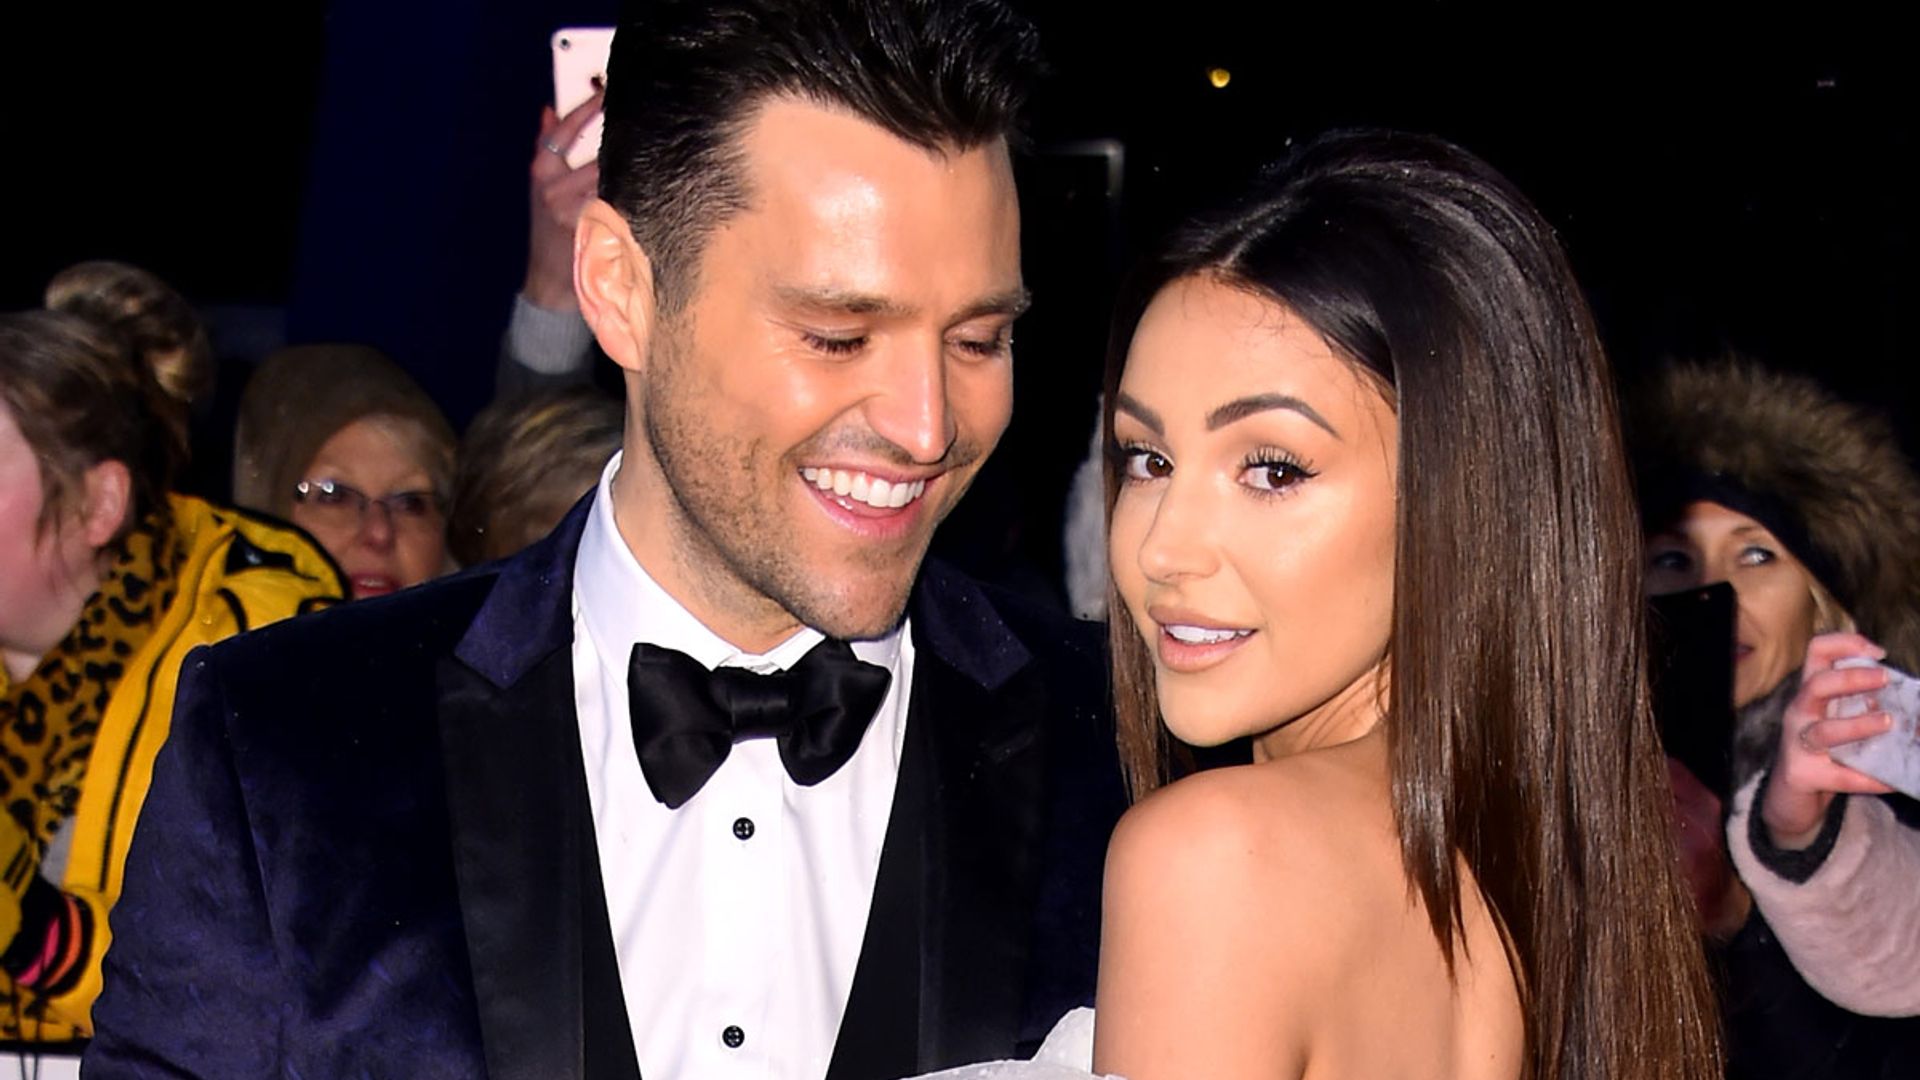 Michelle Keegan celebrates wedding anniversary with Mark Wright with sweet snap - and his family react